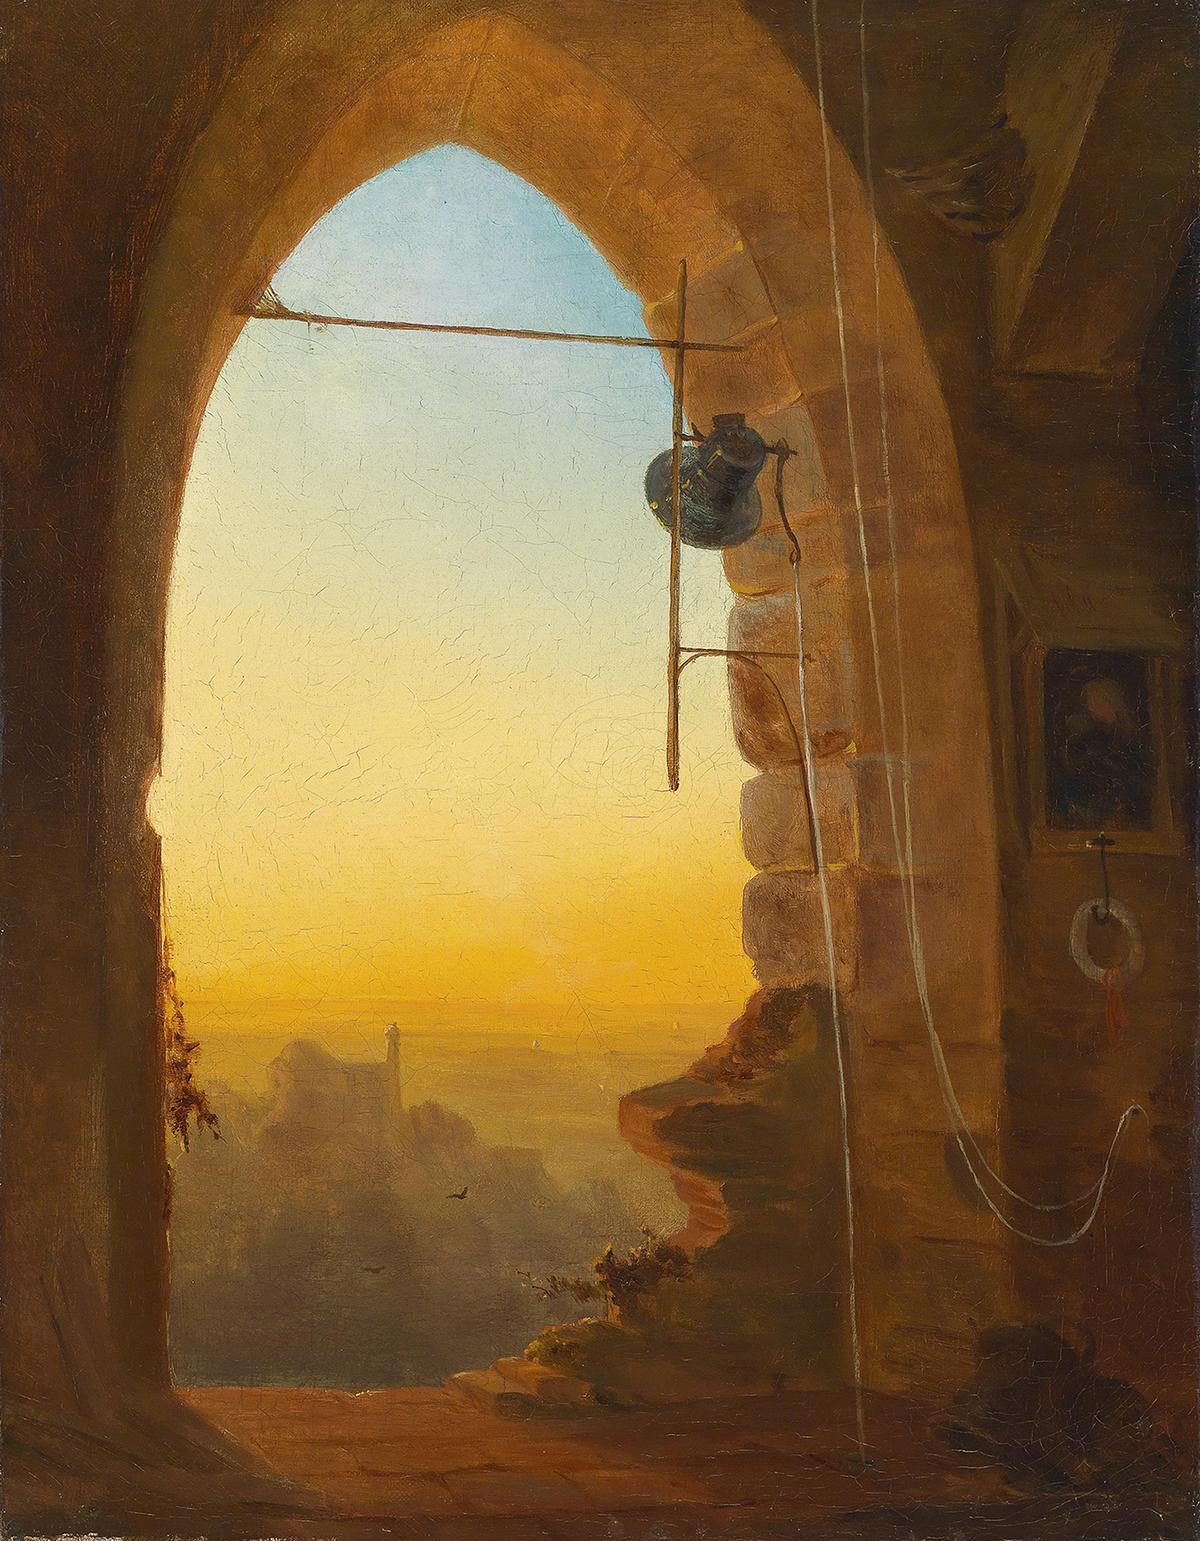 Tennyson’s ringing bells echo our own yearning for a renewal of goodness, truth, and beauty. “The Evening Bell,” 19th century, by Bernhard Stange. Oil on canvas. (Public Domain)